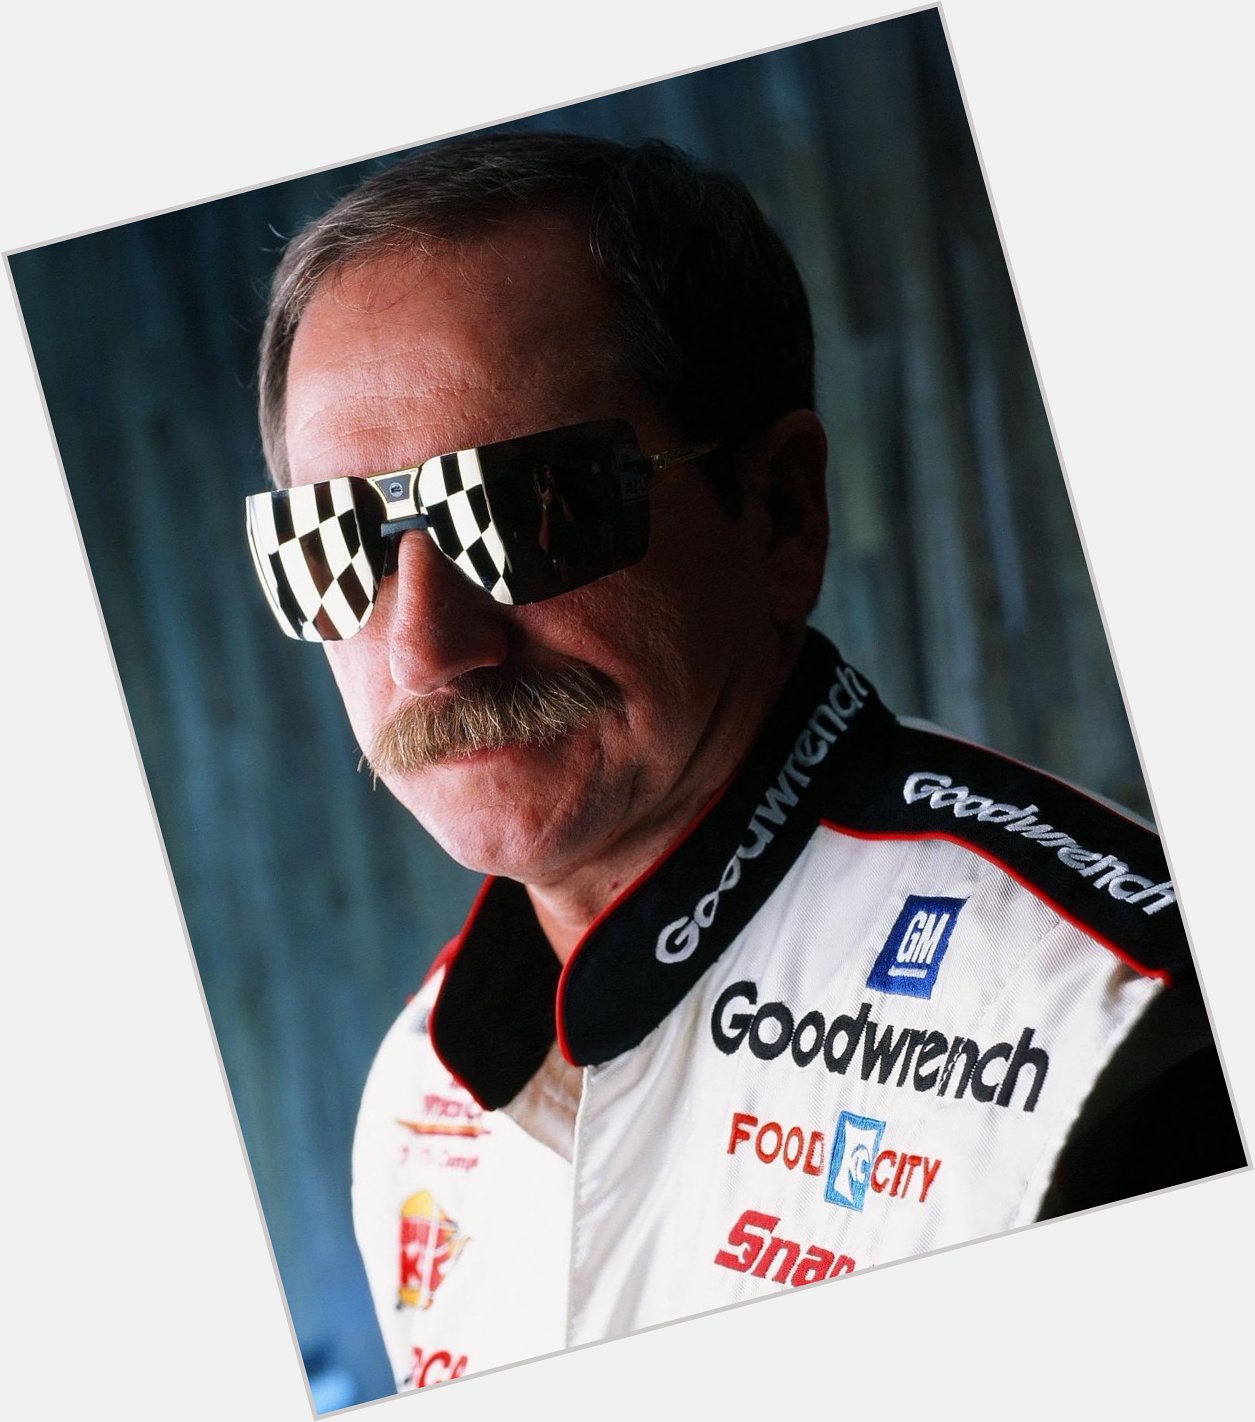 Happy heavenly birthday to my all time favorite driver Dale Earnhardt 